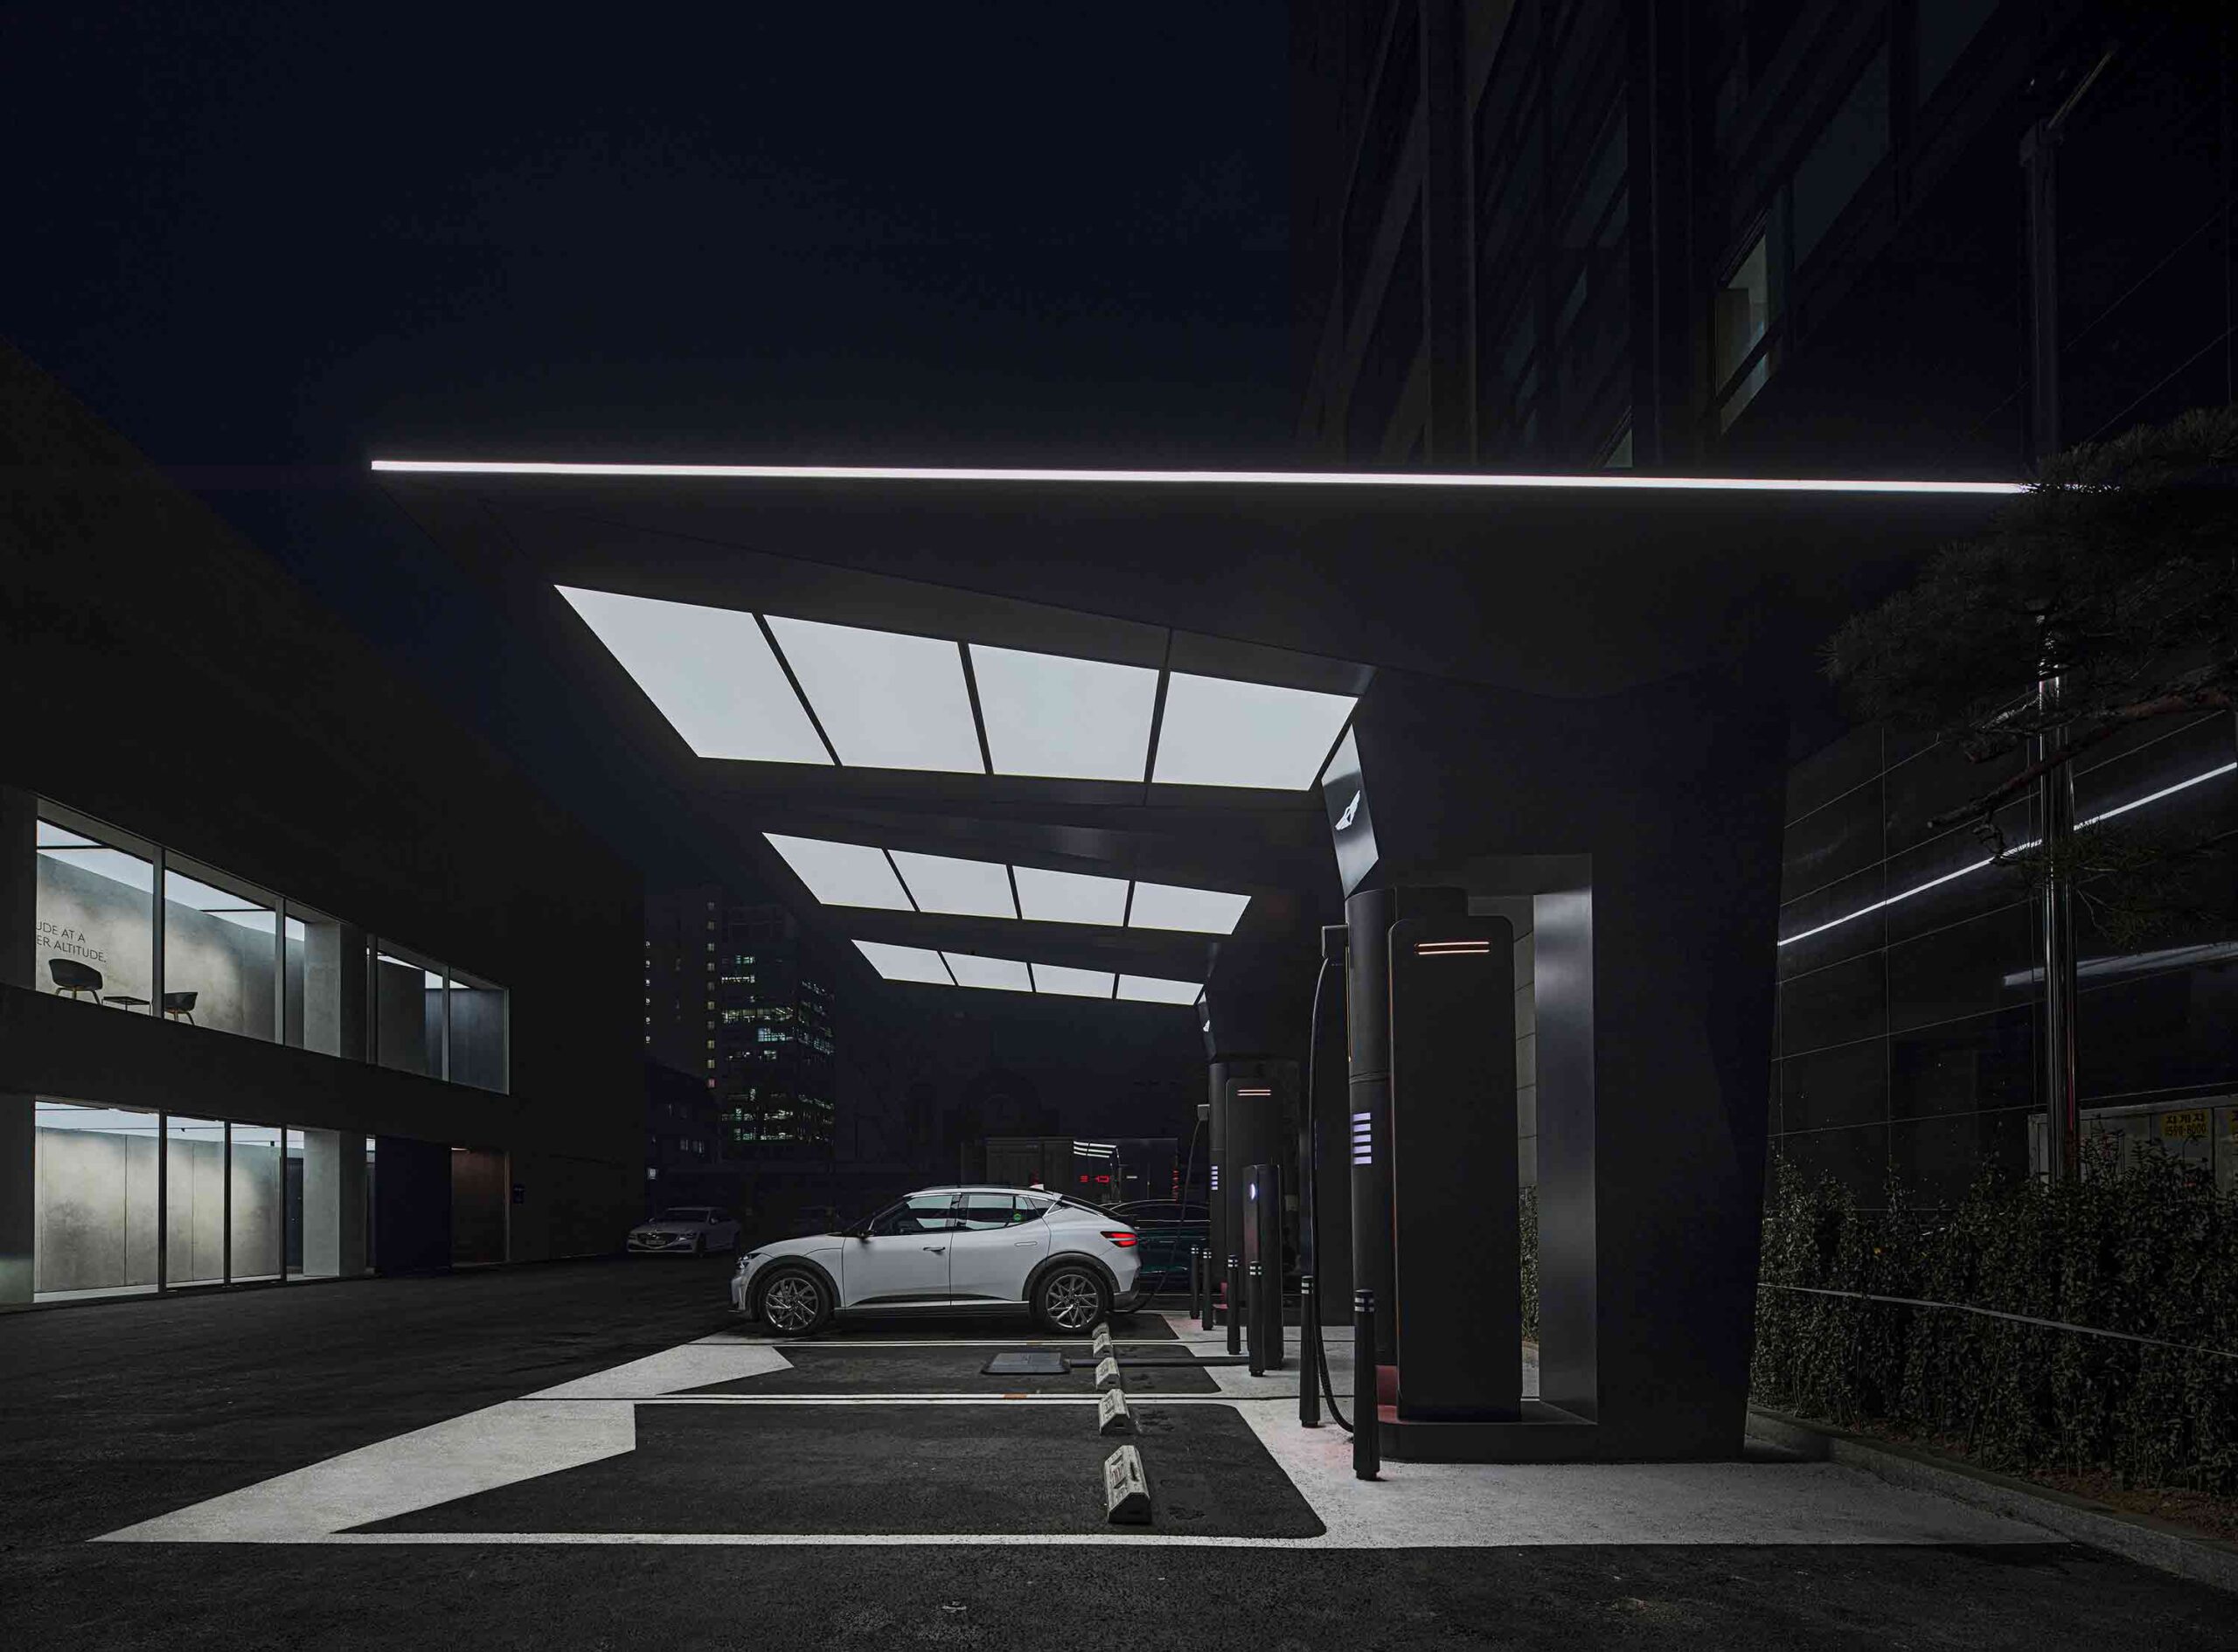 Genesis Electric Vehicle Charging Stations by Morphosis Architects